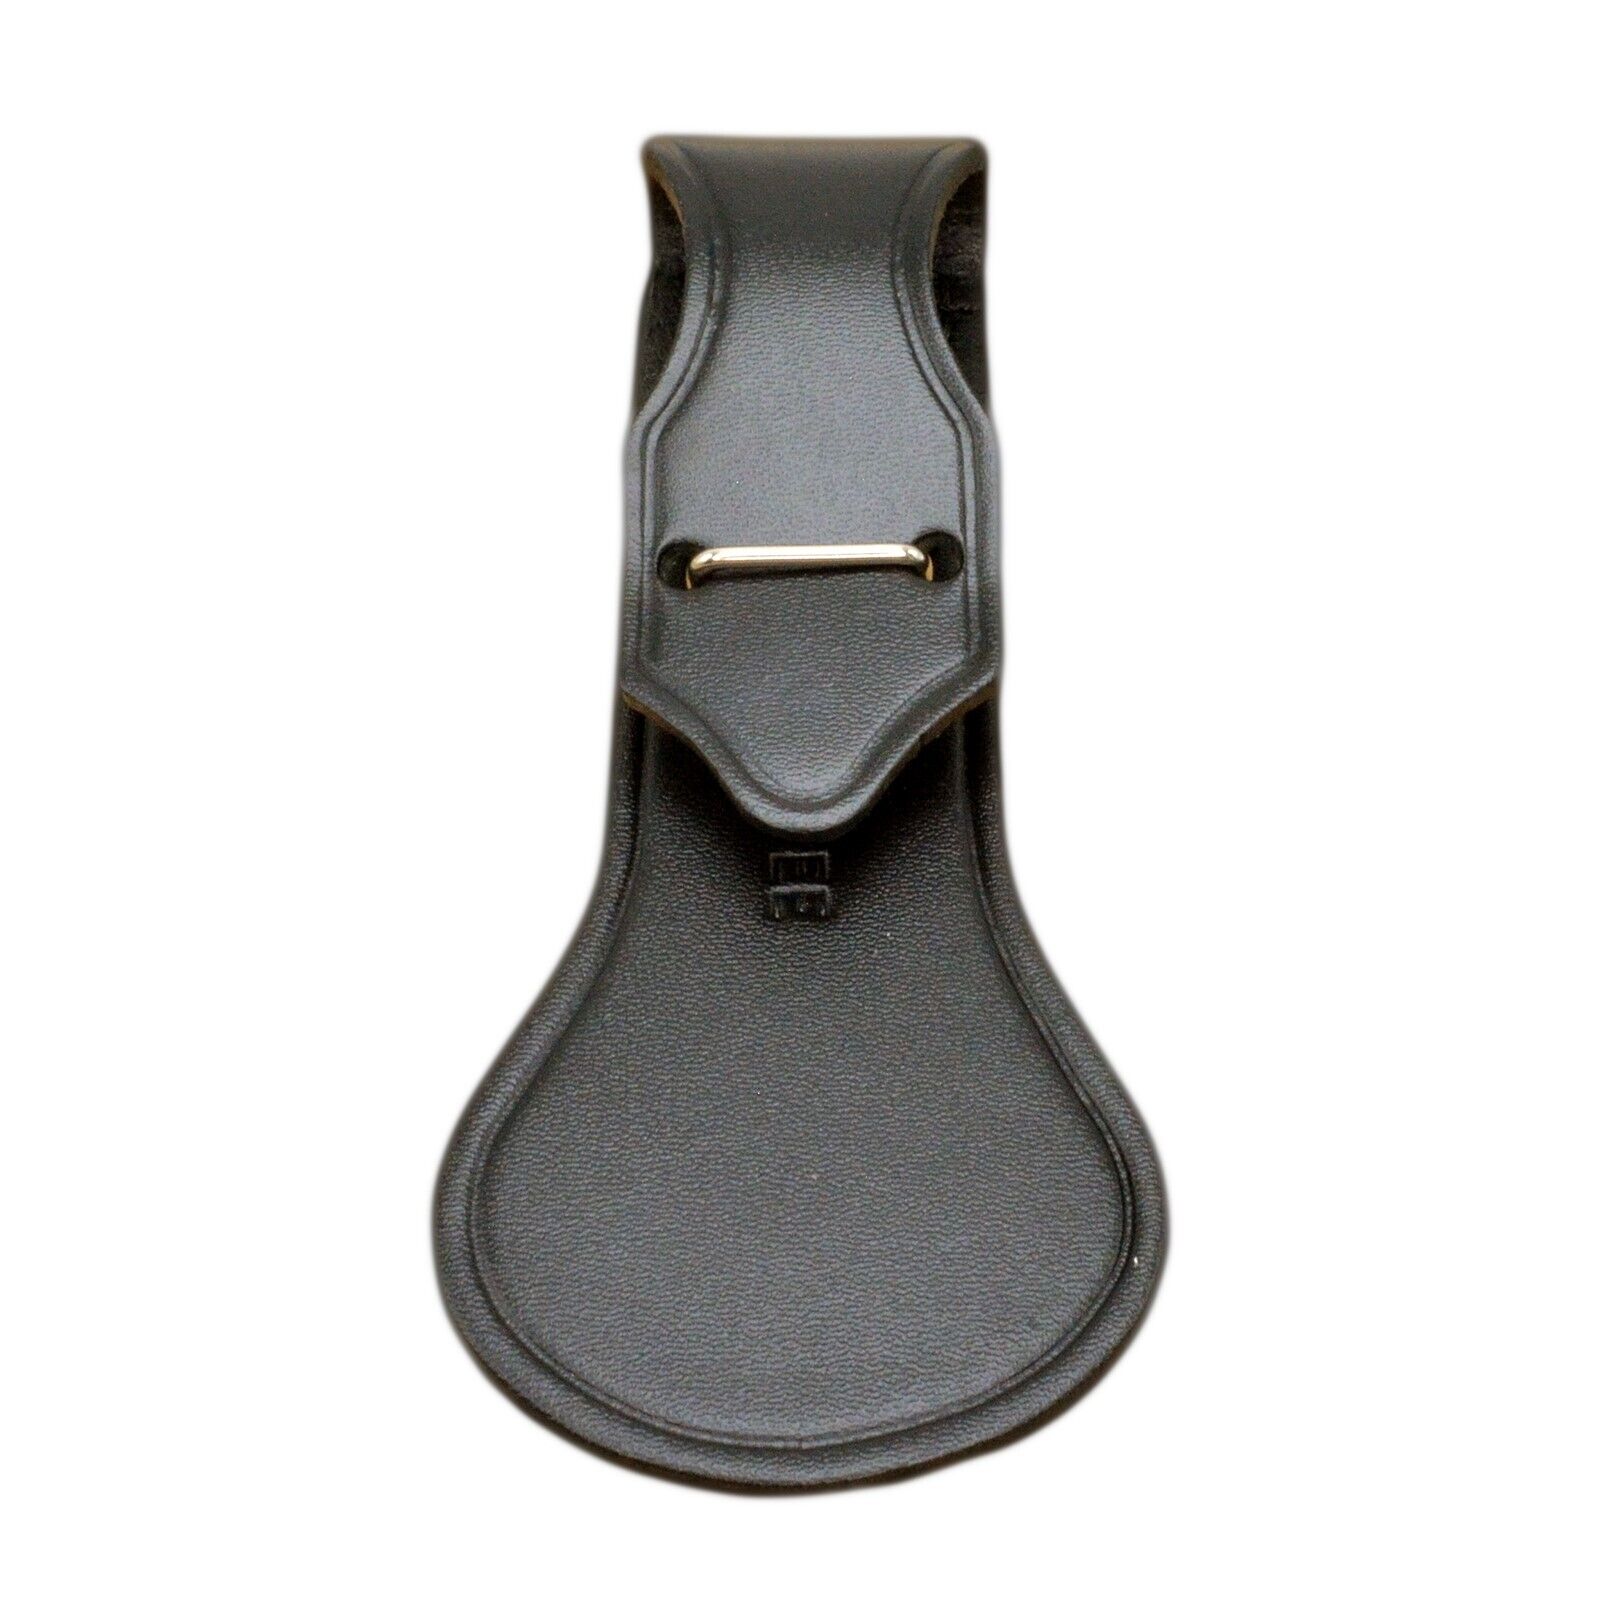 Jay Pee USMC Marine Corps Officer Sabre Guard Black Leather Army Military 